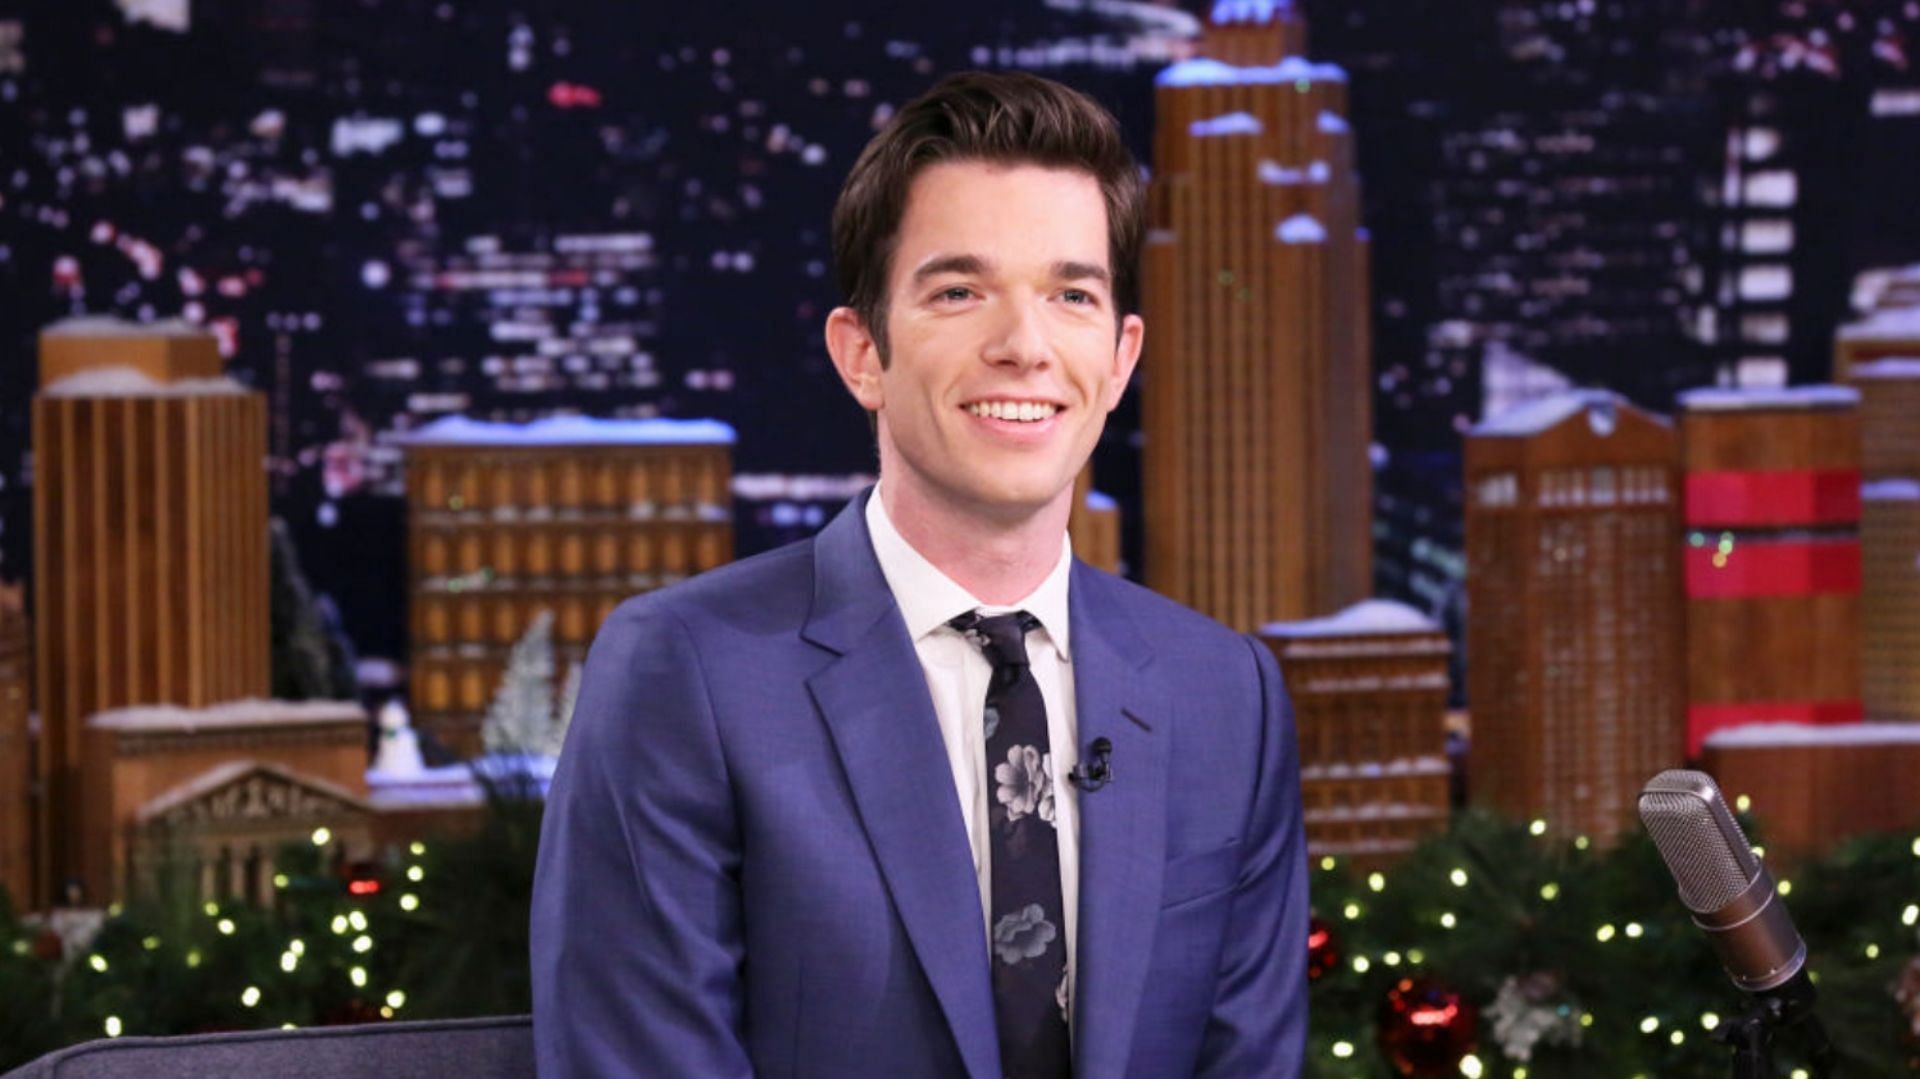 John Mulaney 'From Scratch' Tour 2023 Presale, tickets, dates and more